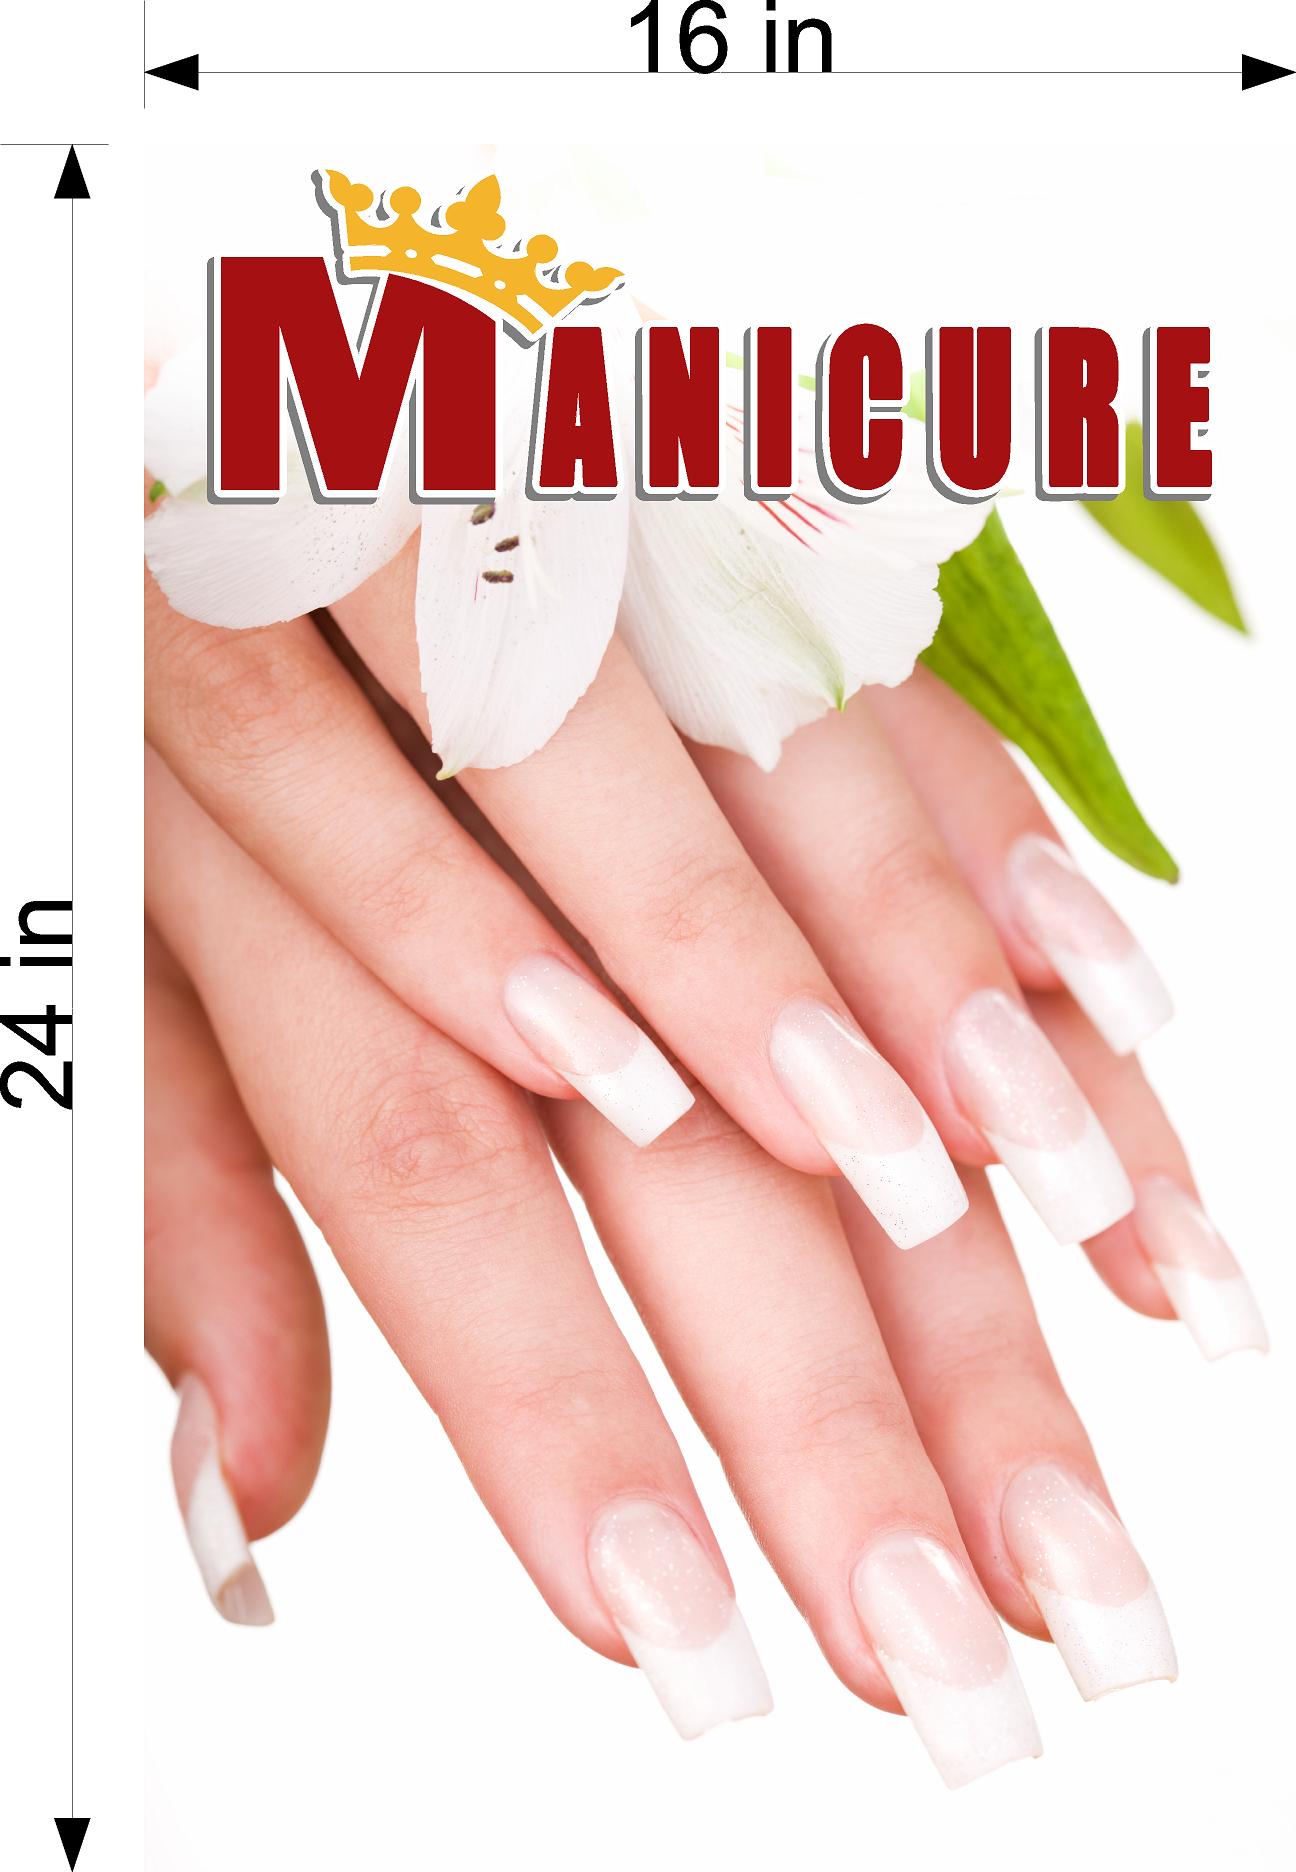 Manicure 19 Photo-Realistic Paper Poster Premium Interior Inside Sign Advertising Marketing Wall Window Non-Laminated Vertical